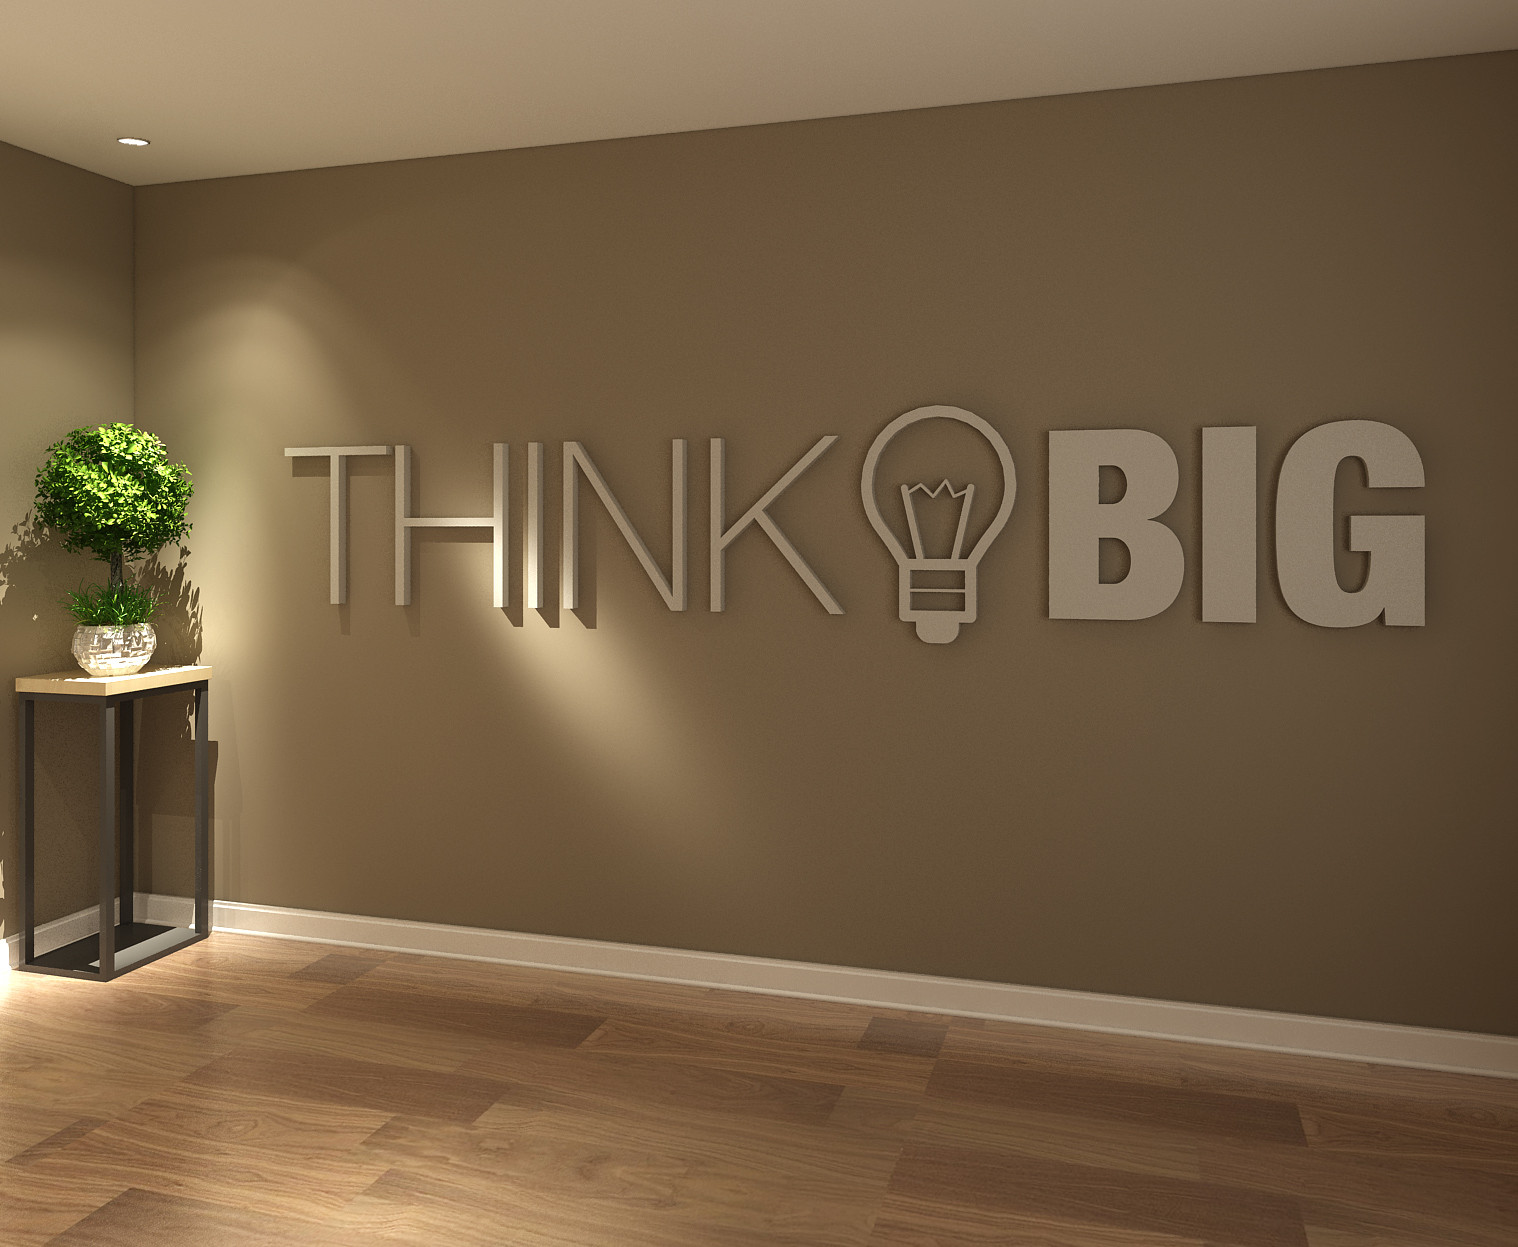 Best ideas about Office Wall Decor
. Save or Pin Think Big fice Decor 3D Moonwallstickers Now.